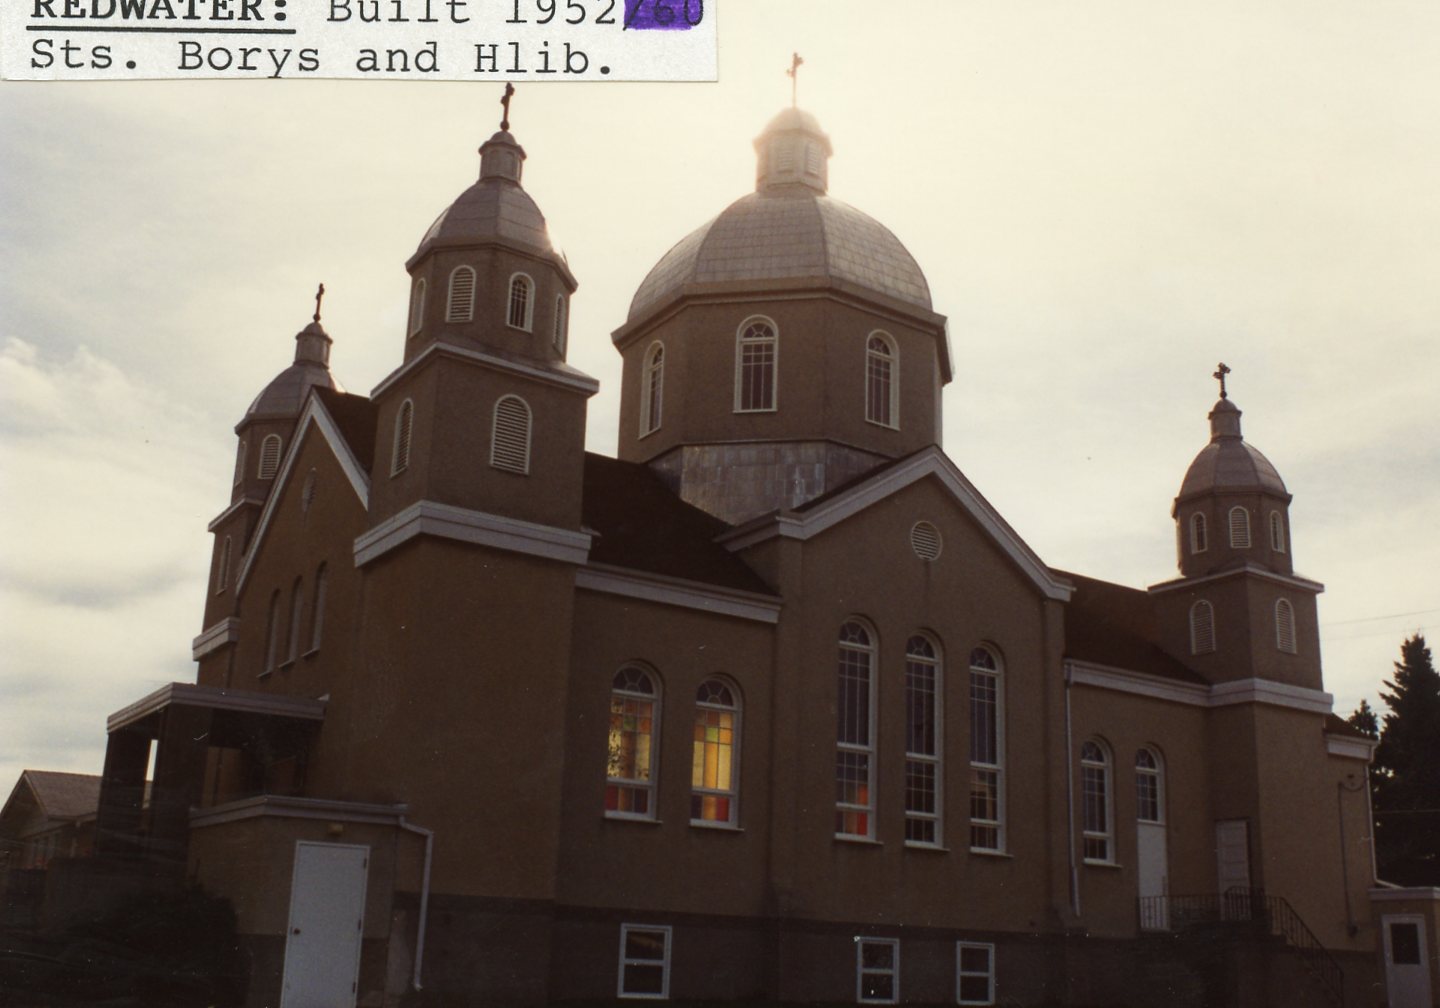 Sts. Borys and Hlib Parish - Redwater (Redwater District)